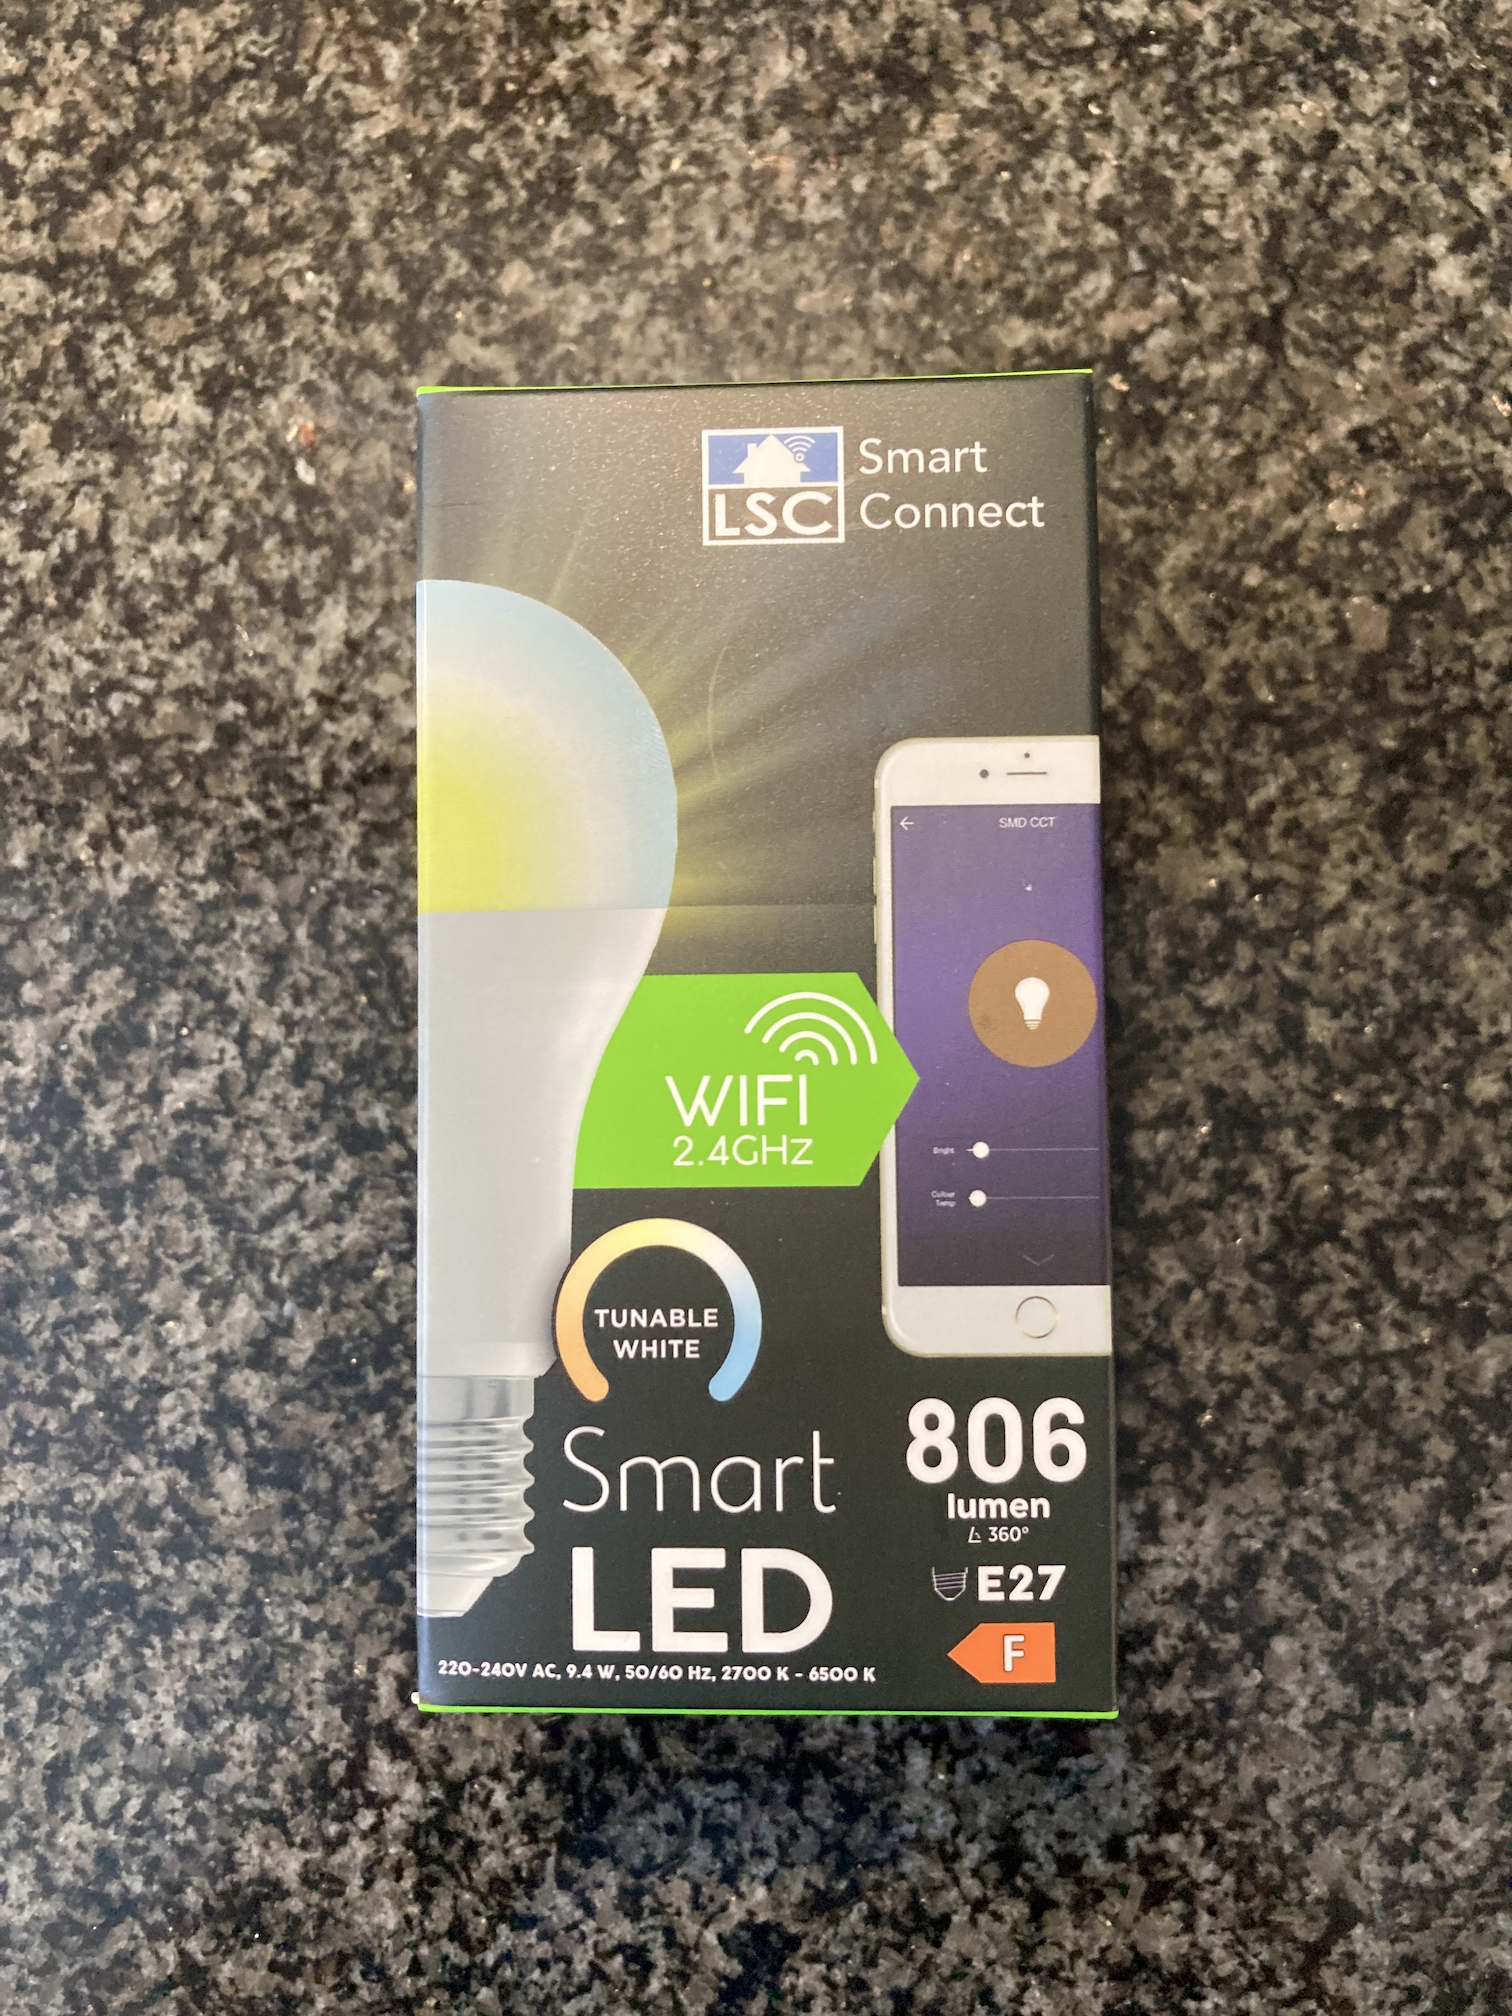 Need help with setting up a smart dimmer switch (LSC smart connect /tuya)  action : r/homeassistant